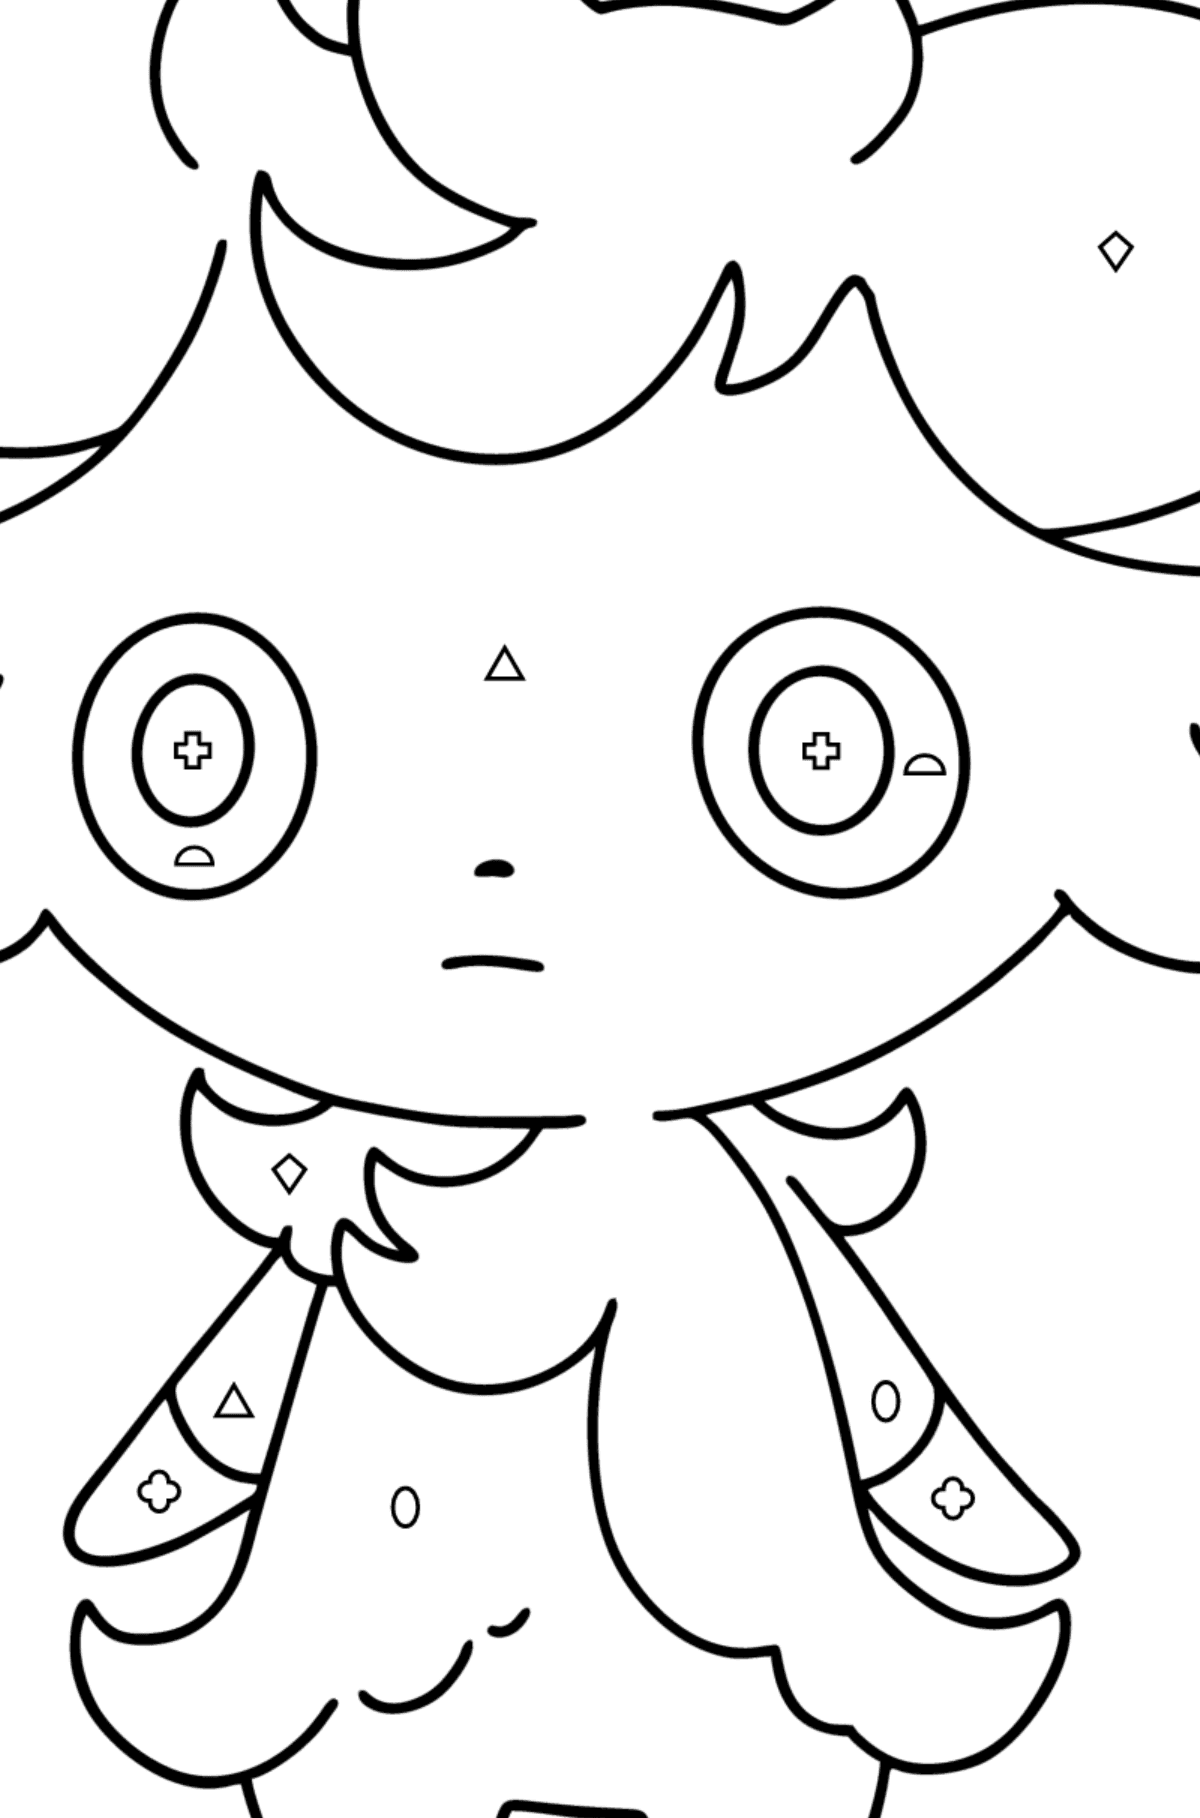 Pokemon Go Espurr coloring page - Coloring by Geometric Shapes for Kids